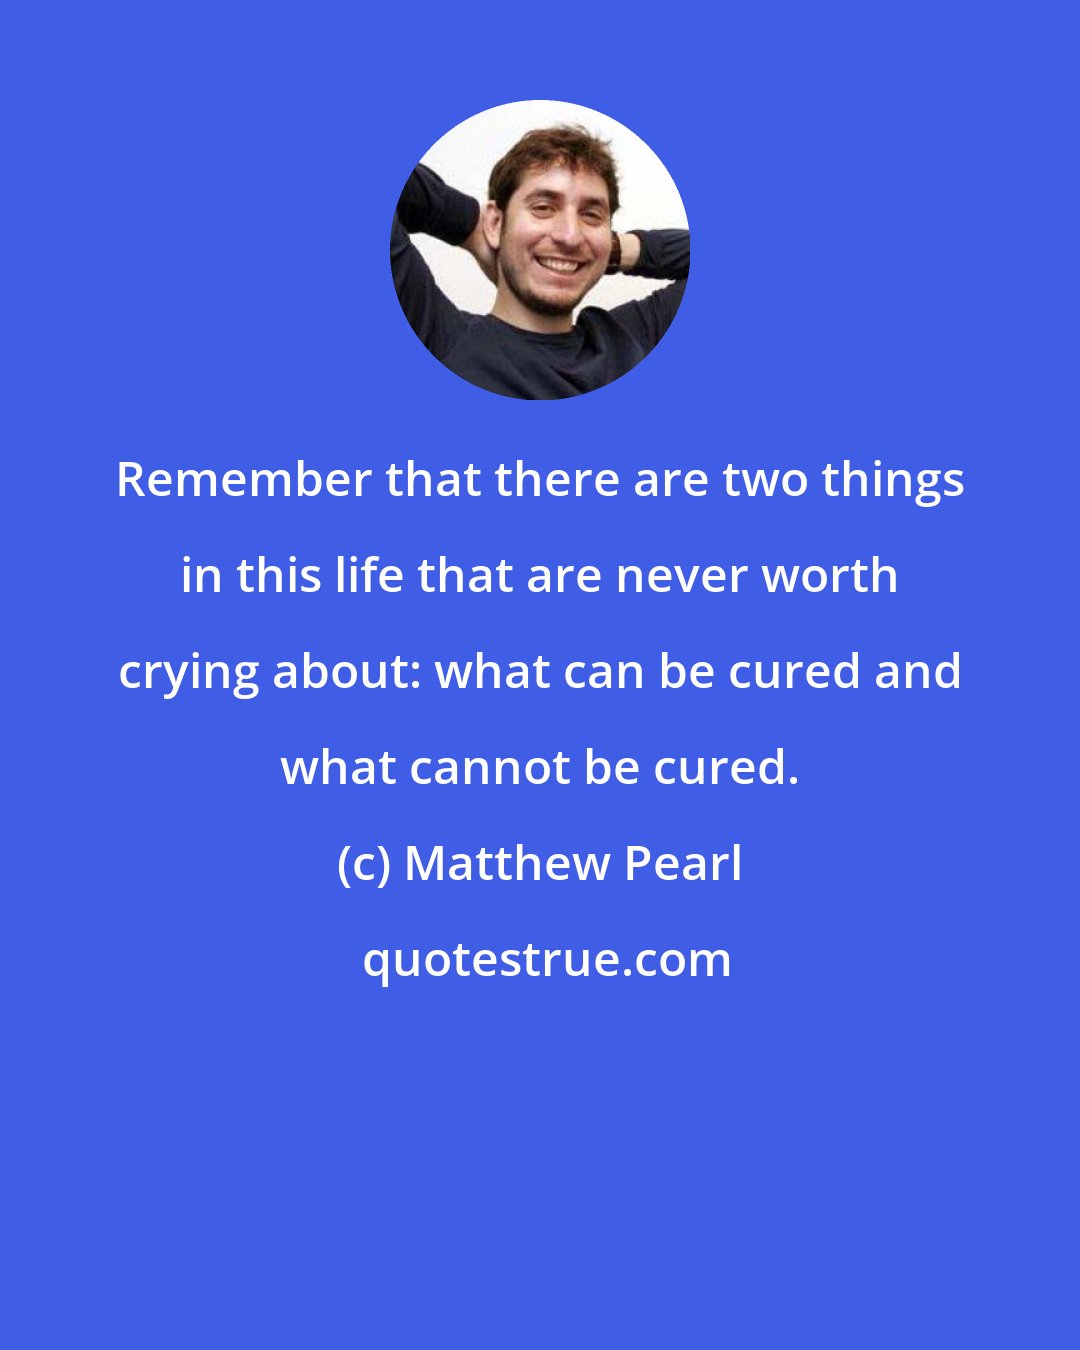 Matthew Pearl: Remember that there are two things in this life that are never worth crying about: what can be cured and what cannot be cured.